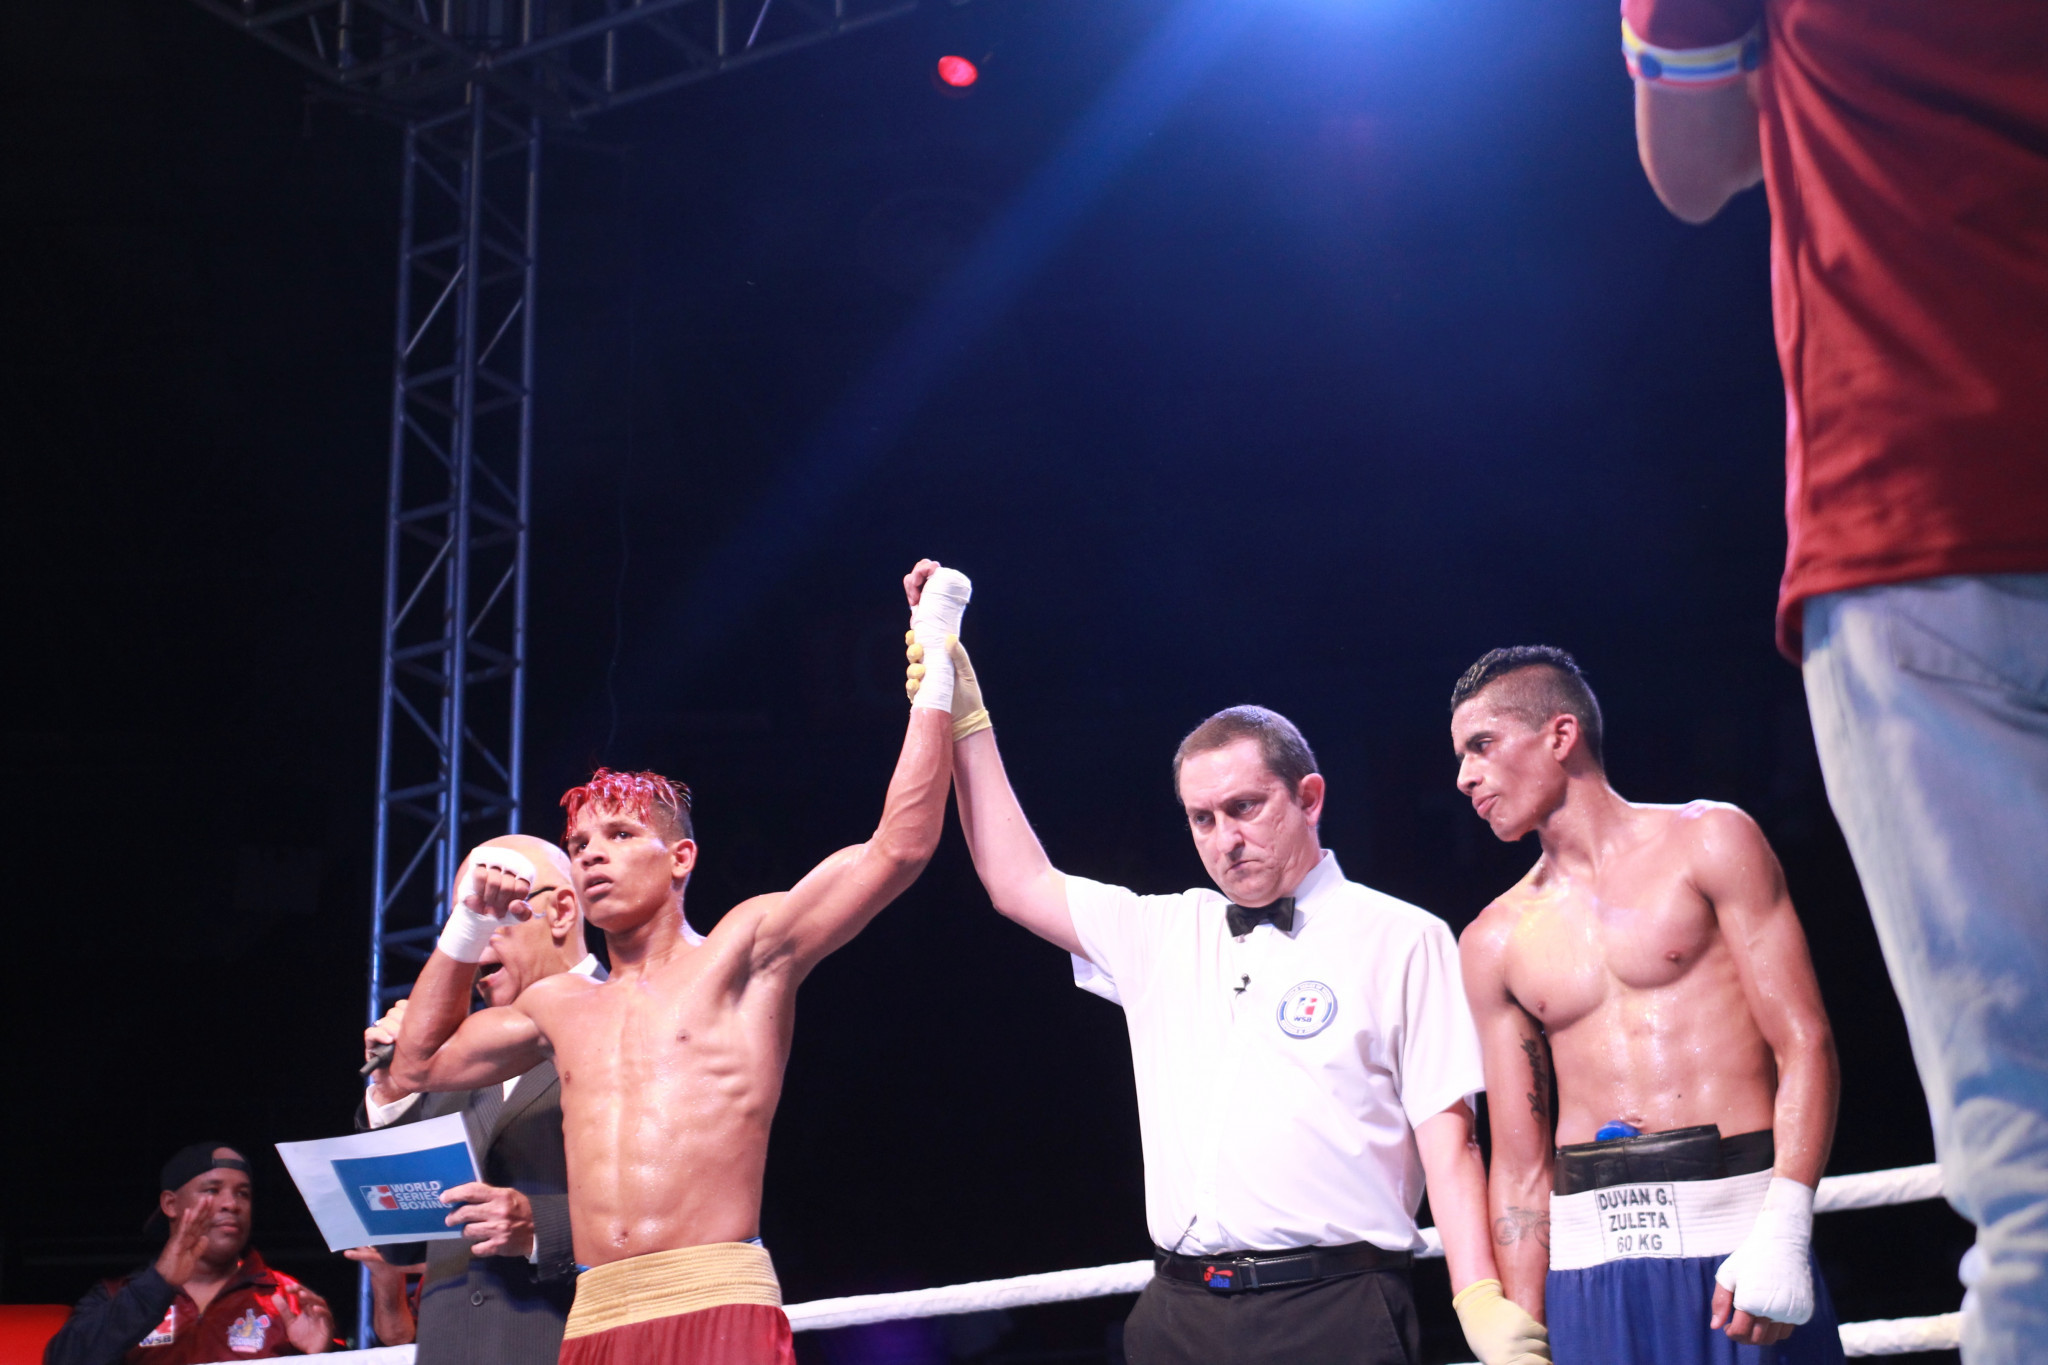 Colombia Heroicos seeking first win of World Series of Boxing season